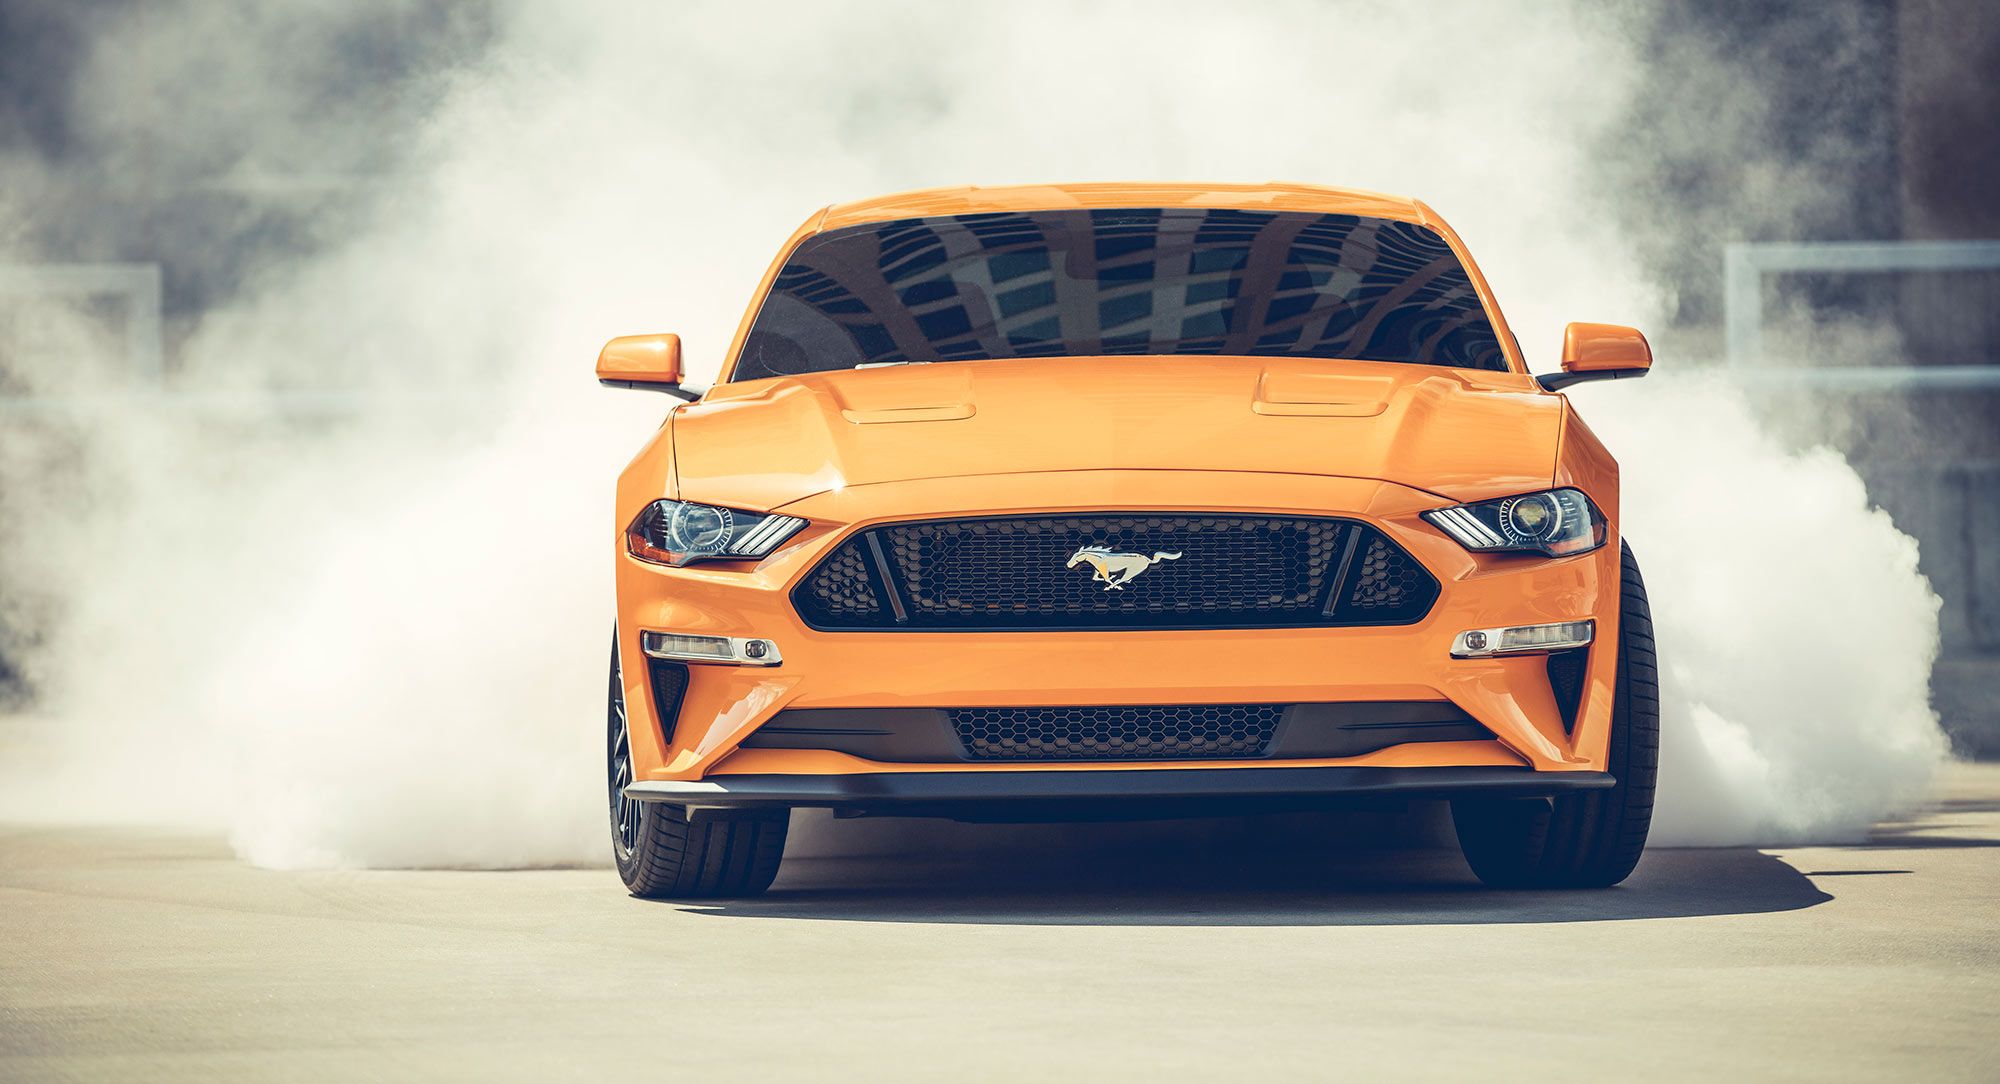 2021's Ford Mustang GT